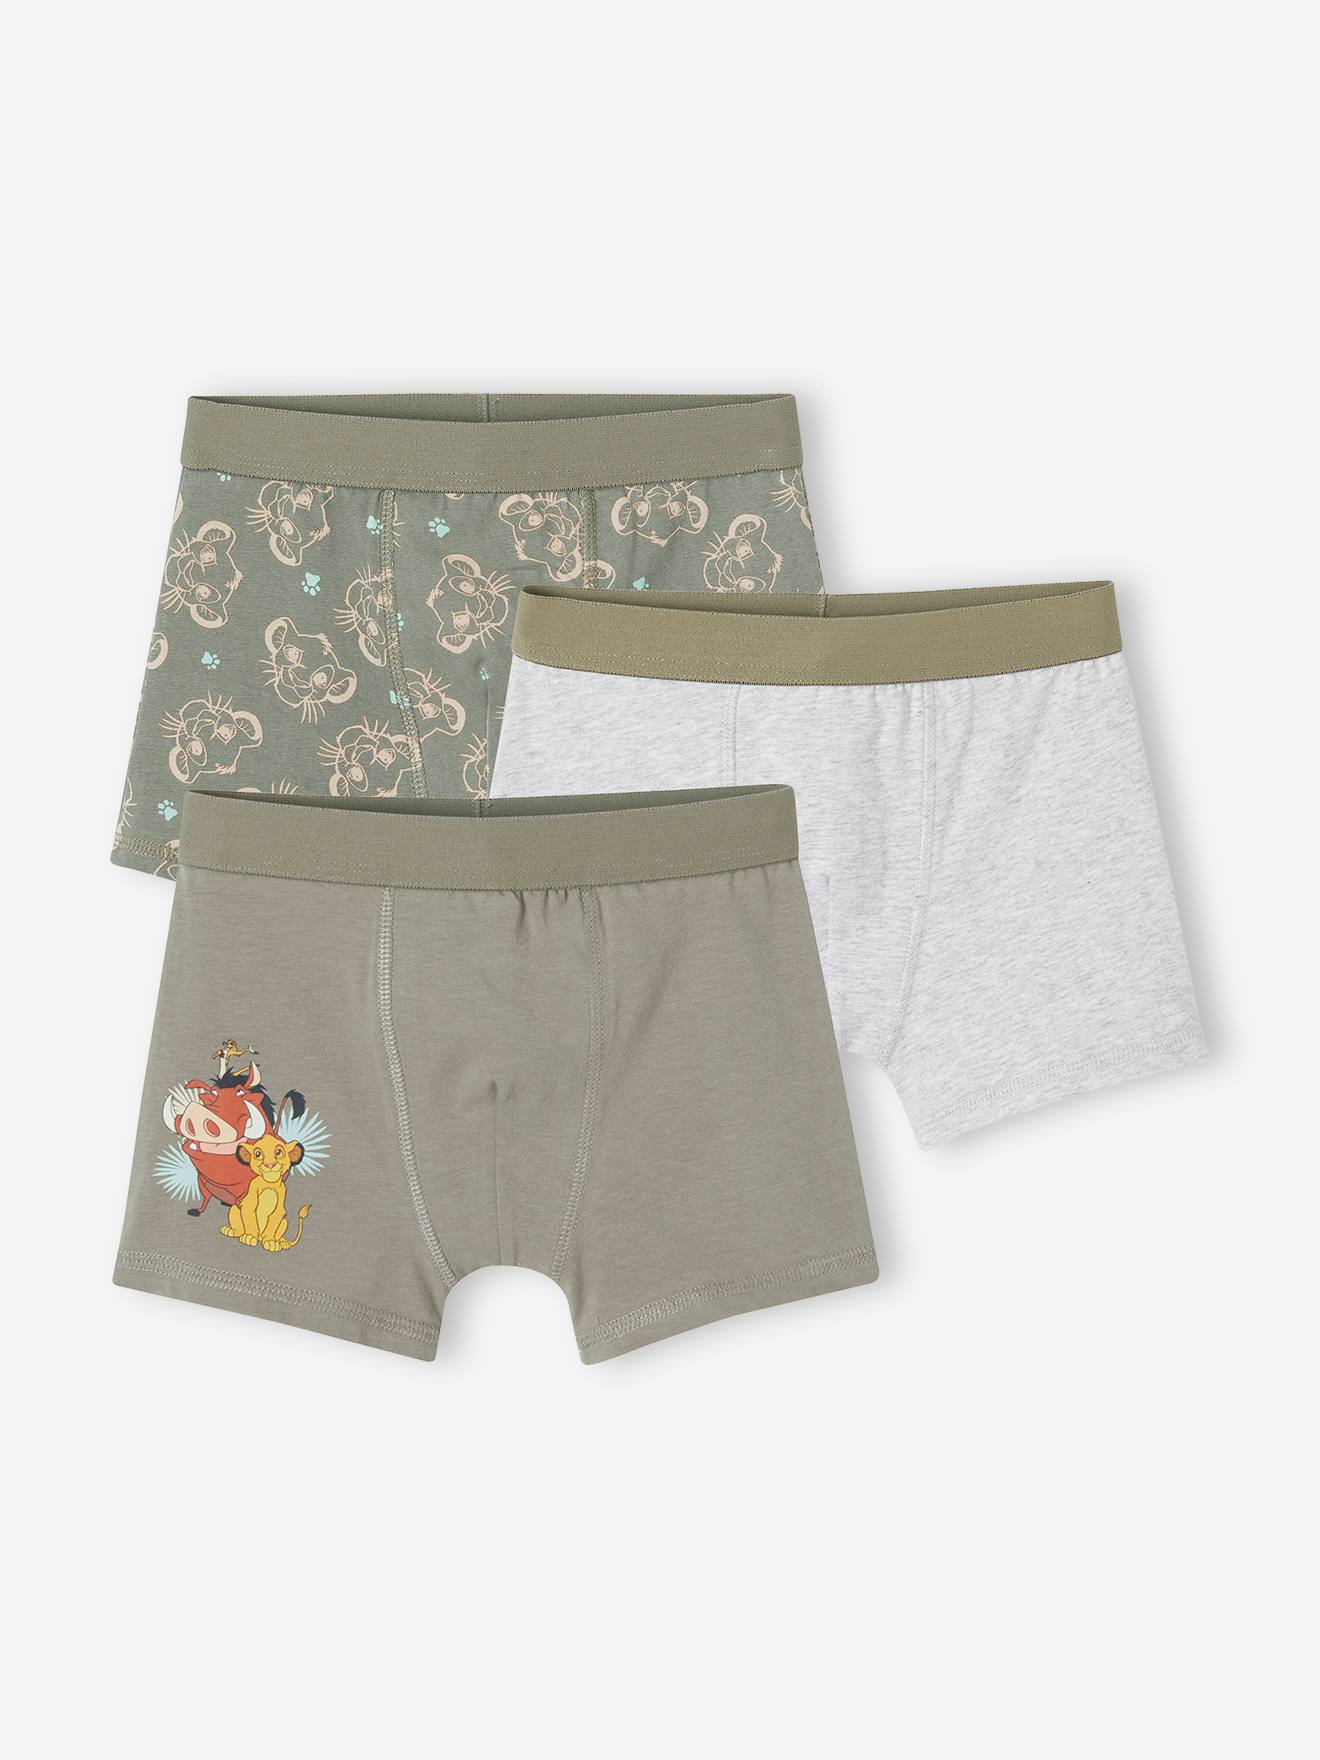 Pack of 3 The Lion King by Disney(r) Boxer Shorts khaki